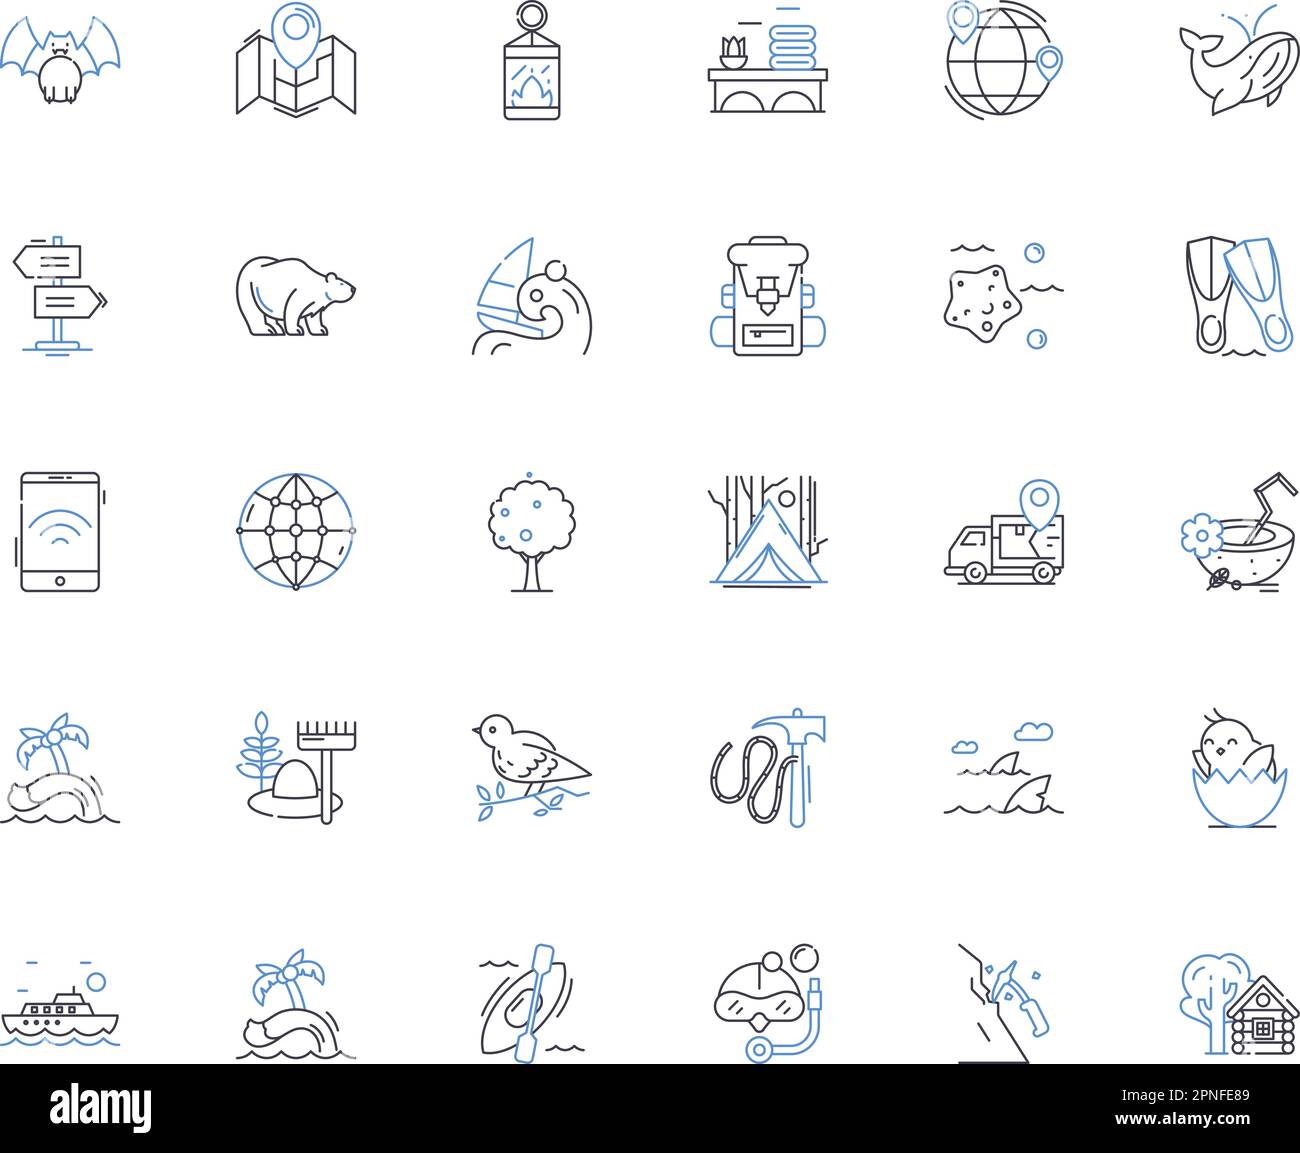 Mountain hike line icons collection. Trek, Summit, Ascent, Altitude, Backpack, Trail, Scenic vector and linear illustration. Challenge,Adventure Stock Vector